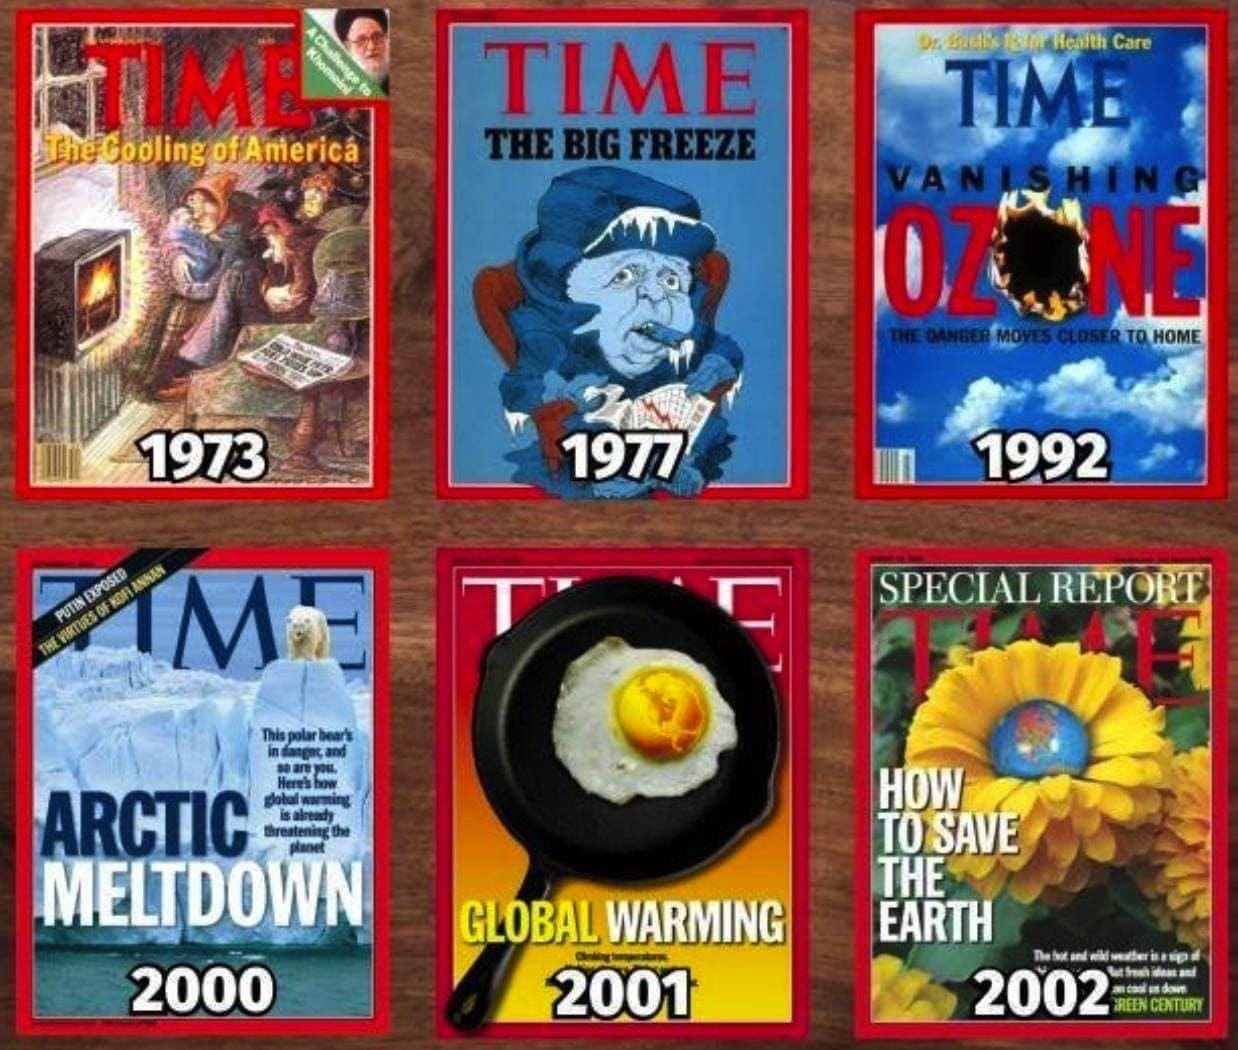 May be an image of 1 person and text that says 'TIME Ûh- TIME THE FREEZE કલ Poor Health Care TIME VANISHIN OZ ONE HOME 1973 1977 POSE ANMAH ME 1992 SPECIAL REPORT ARCTIC MELTDOWN 2000 GLOBAL WARMING 2001 HOW SAVE THE EARTH 2002 ttruh REEN CENTURY'